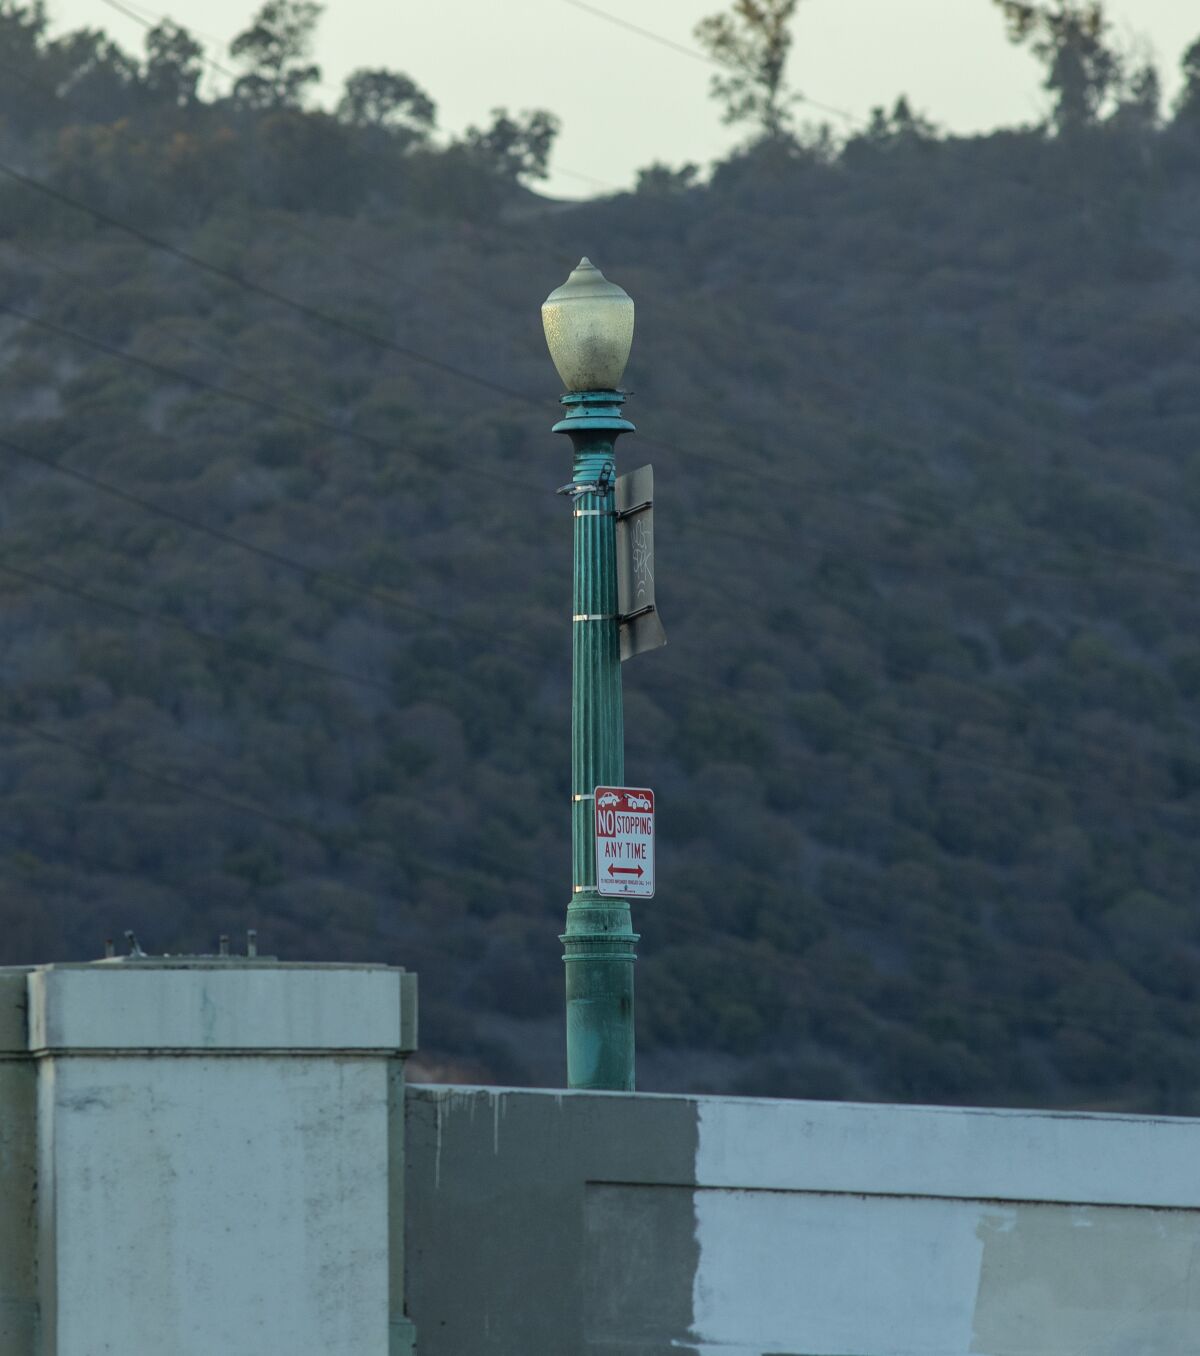 A bronze lamppost with a green-colored patina next to a bridge